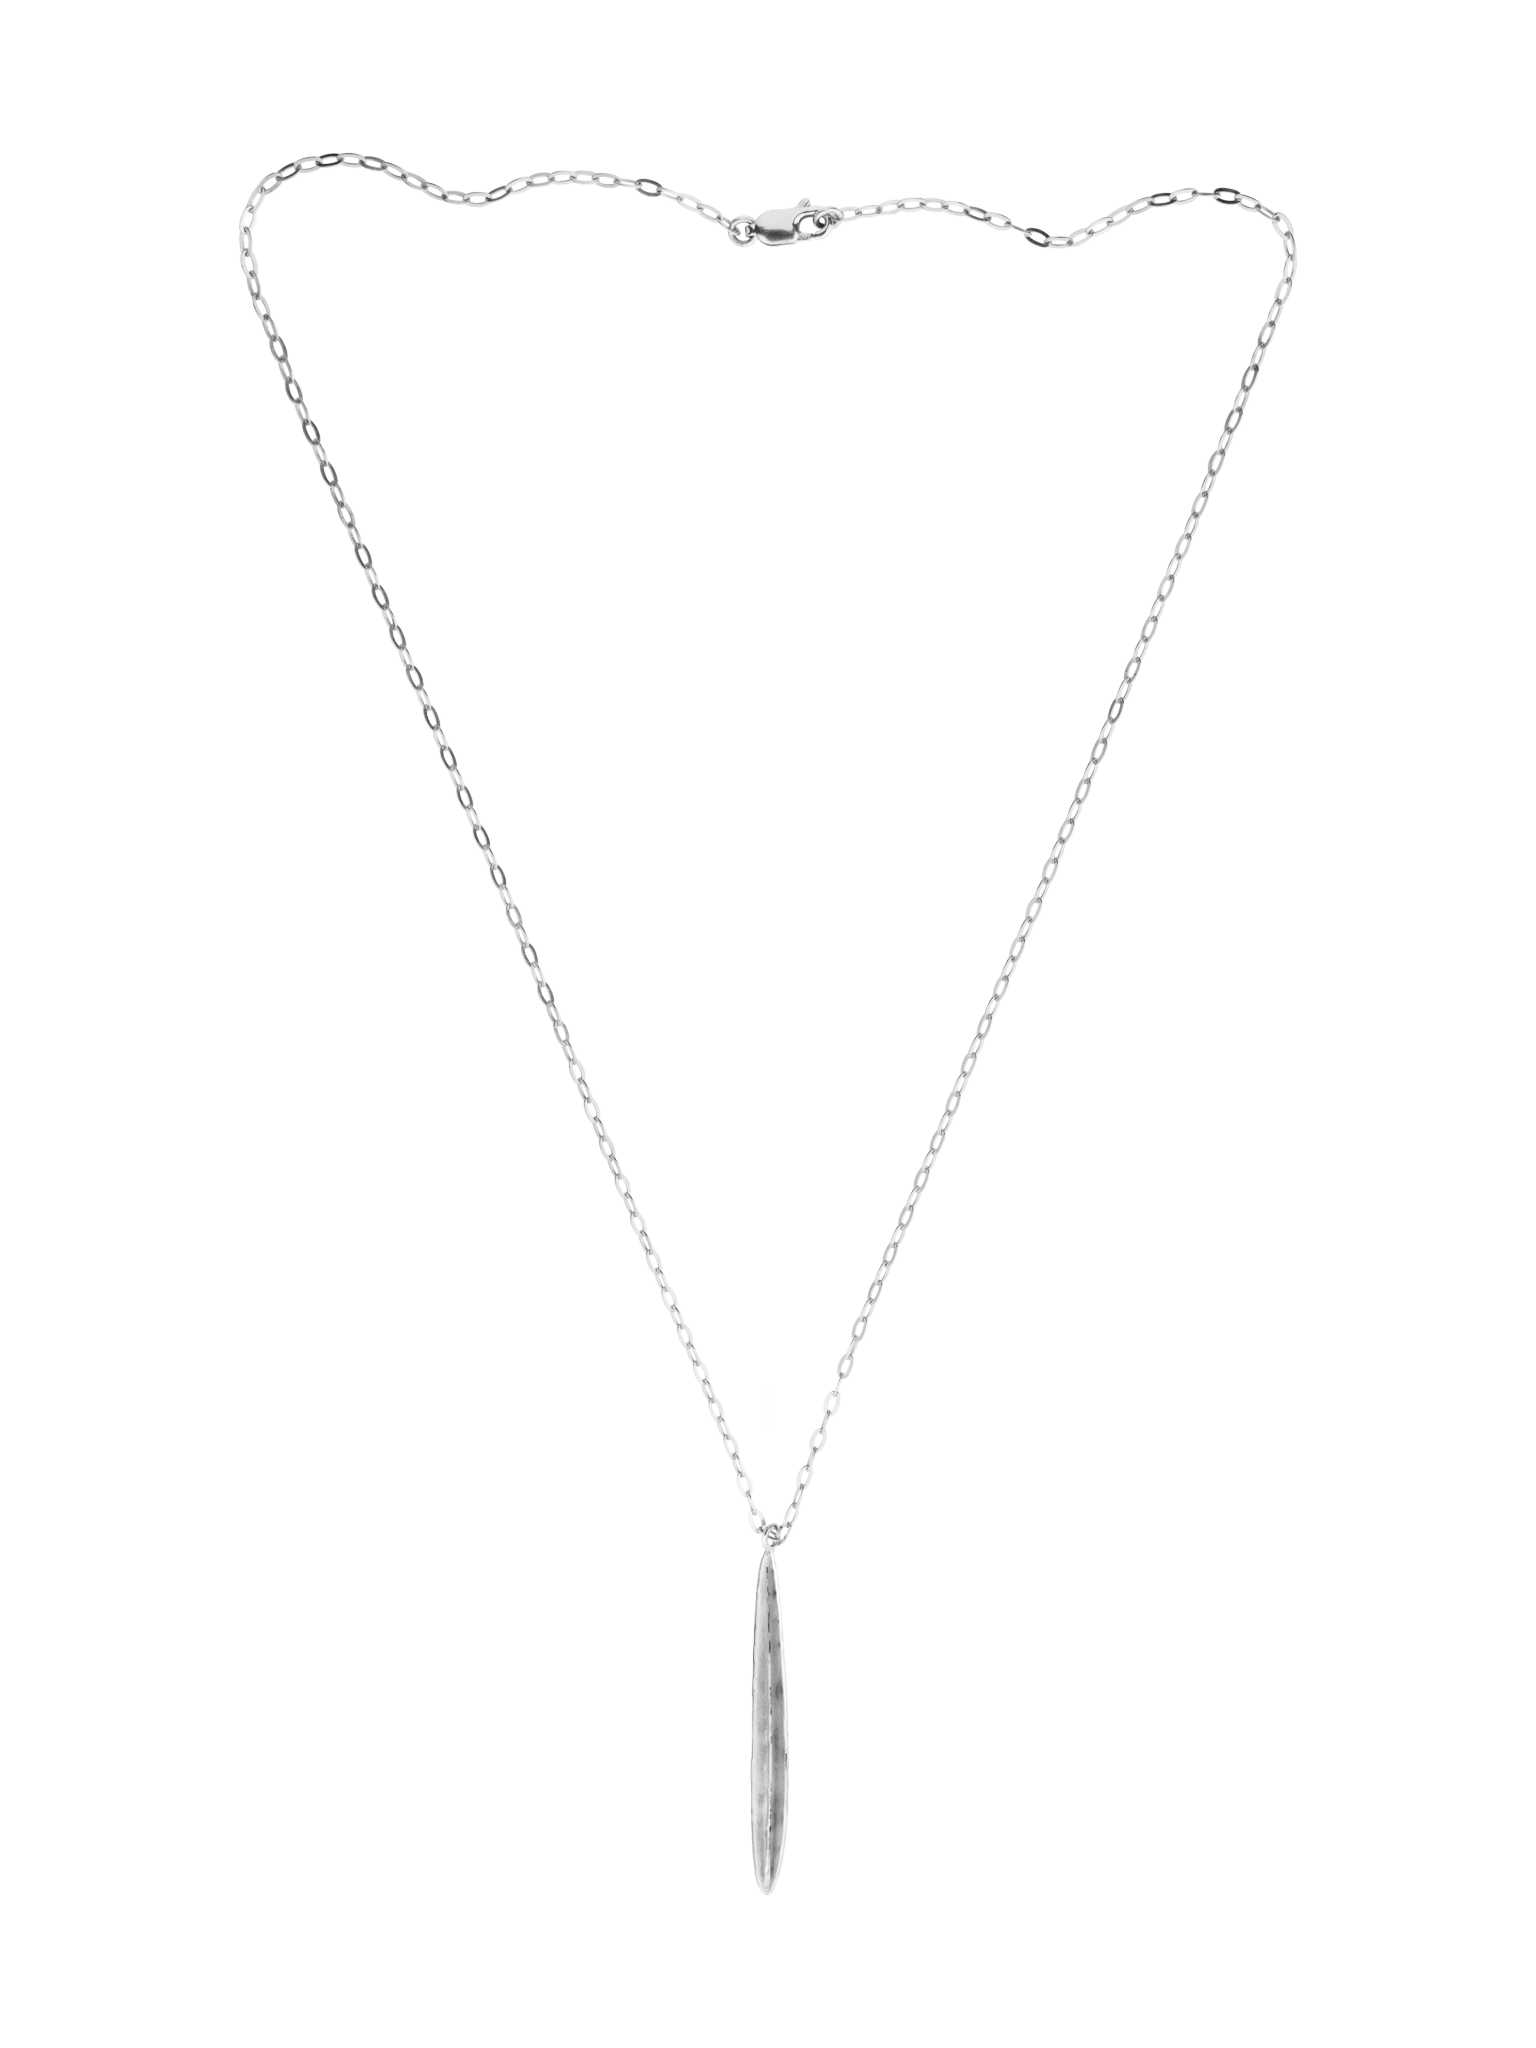 Blade of grass necklace